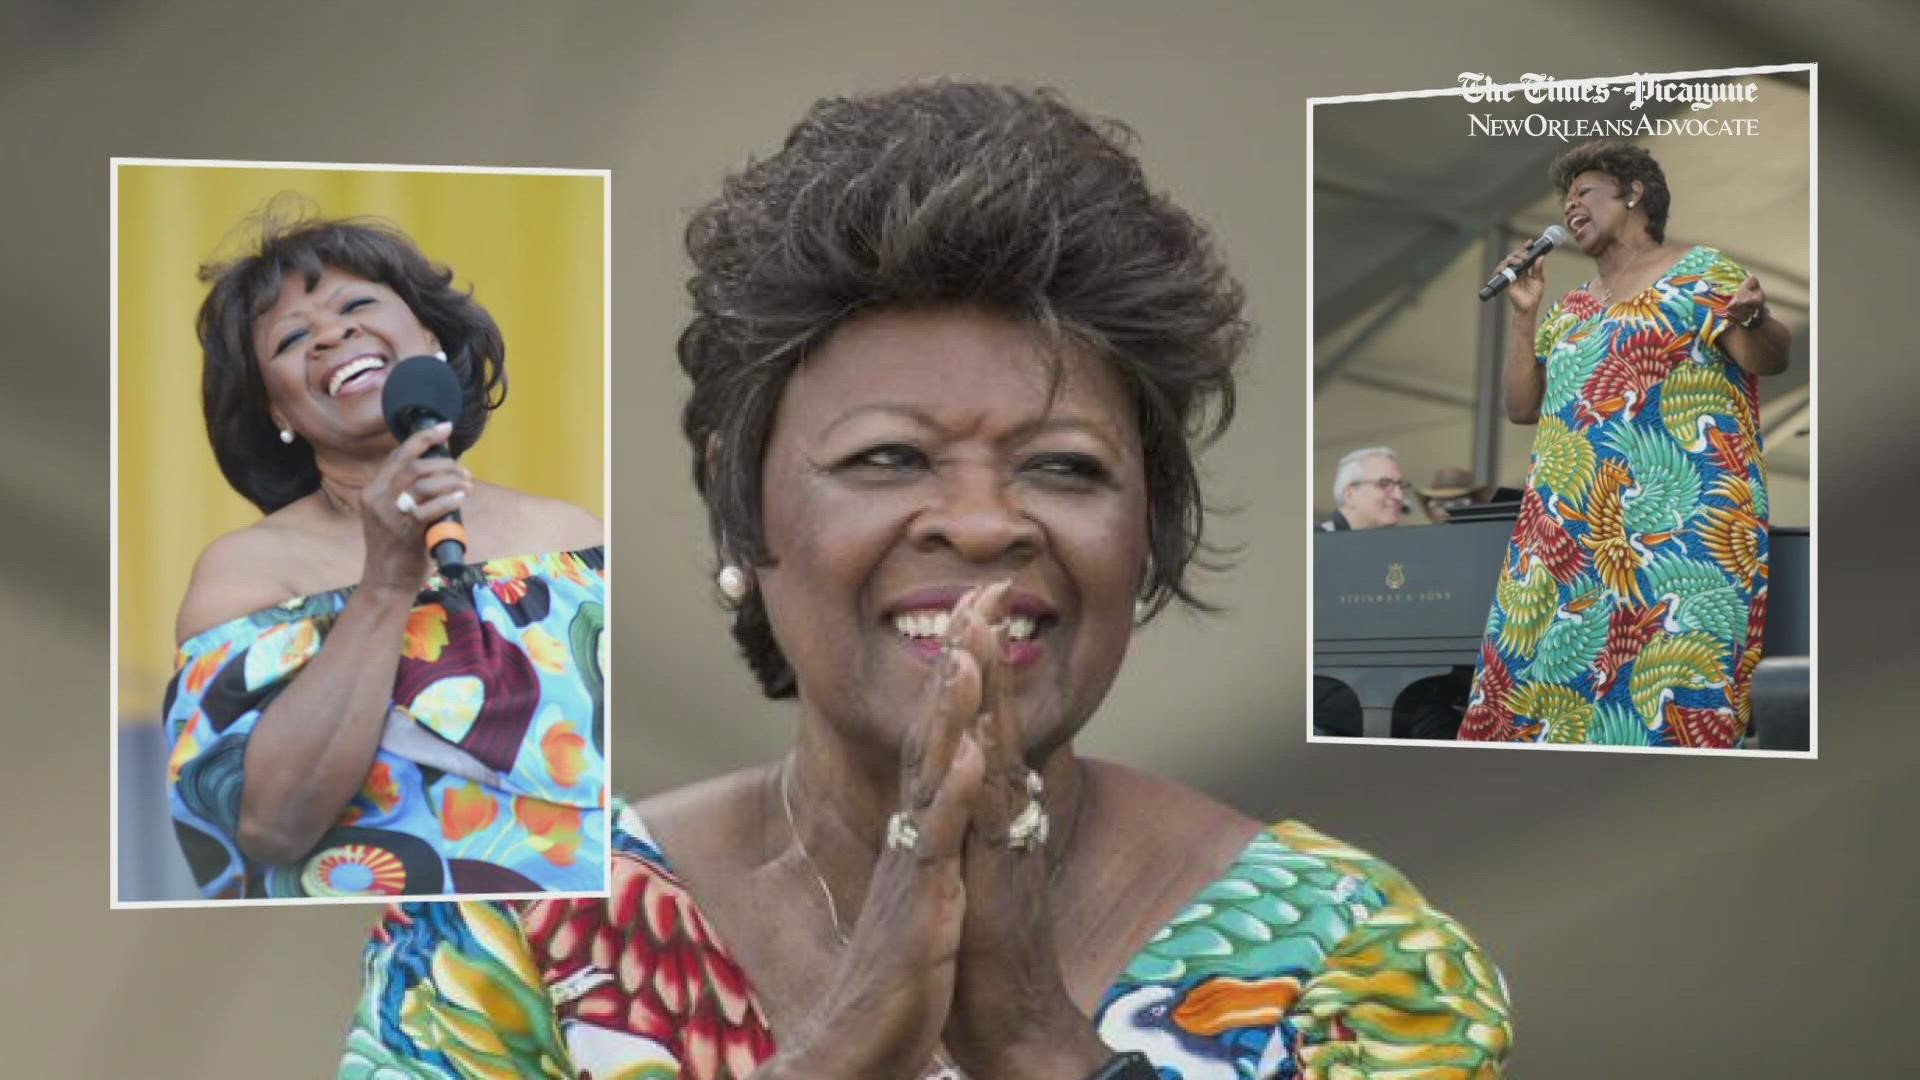 Irma Thomas, who is missing out on performing at Jazz Fest for the second year in a row, urges local musicians to get vaccinated.